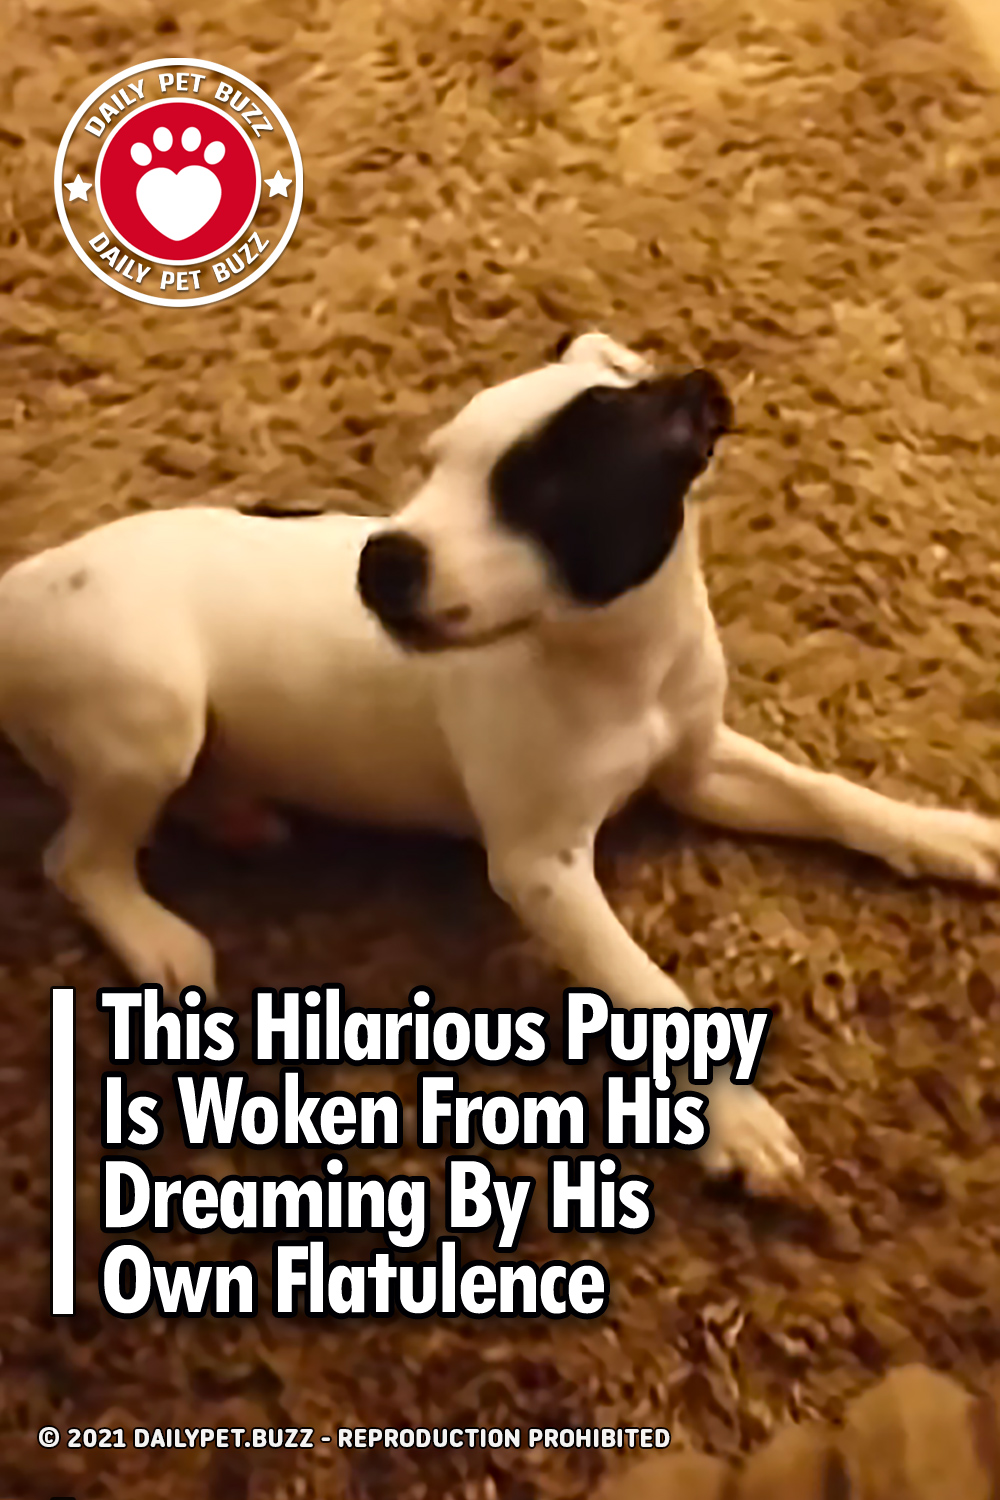 This Hilarious Puppy Is Woken From His Dreaming By His Own Flatulence